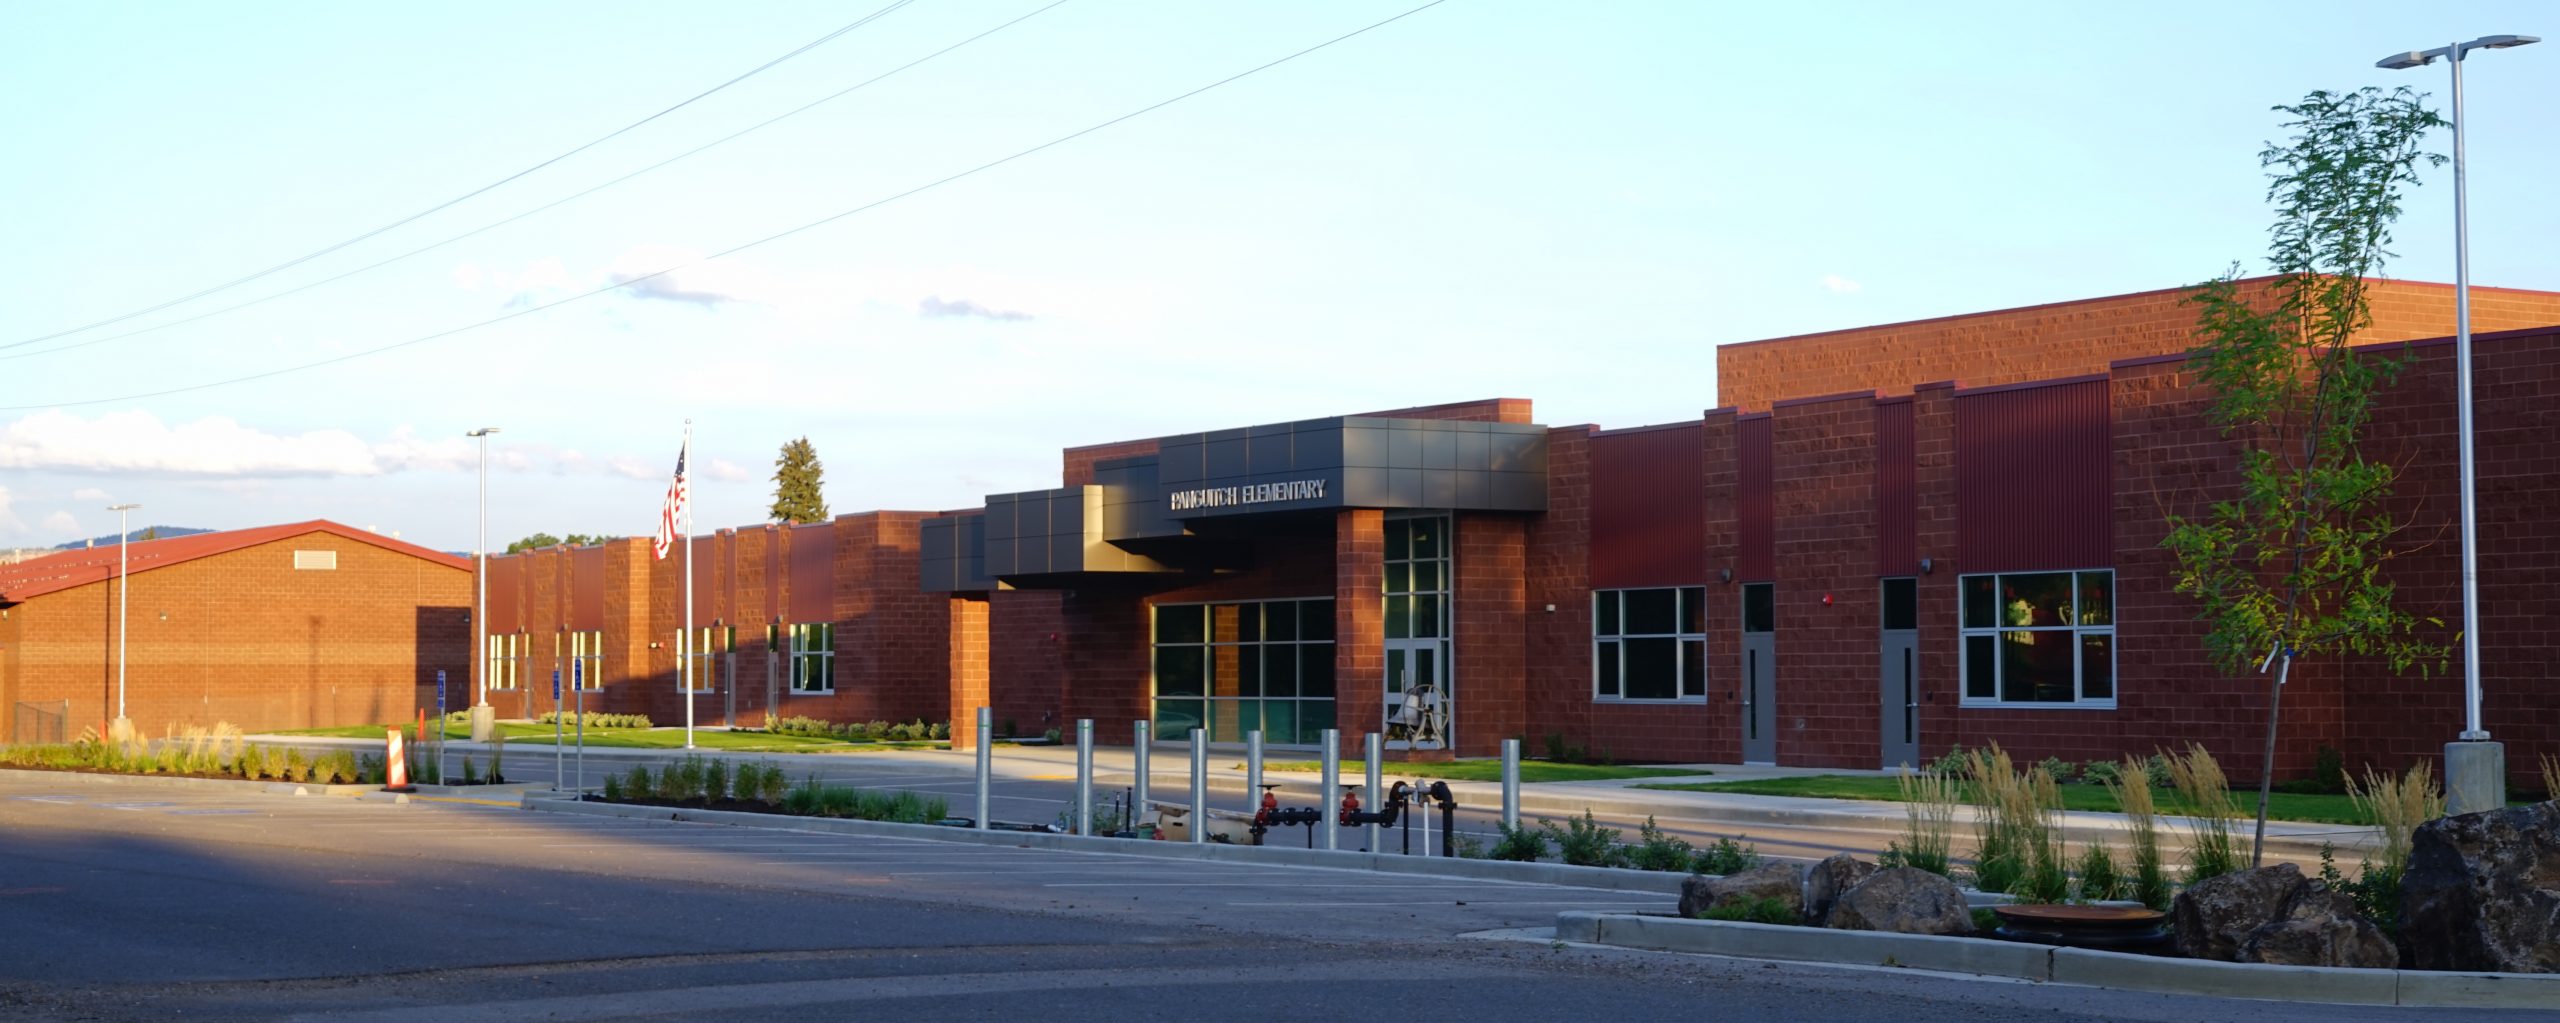 photo of exterior of new Panguitch Elementary School